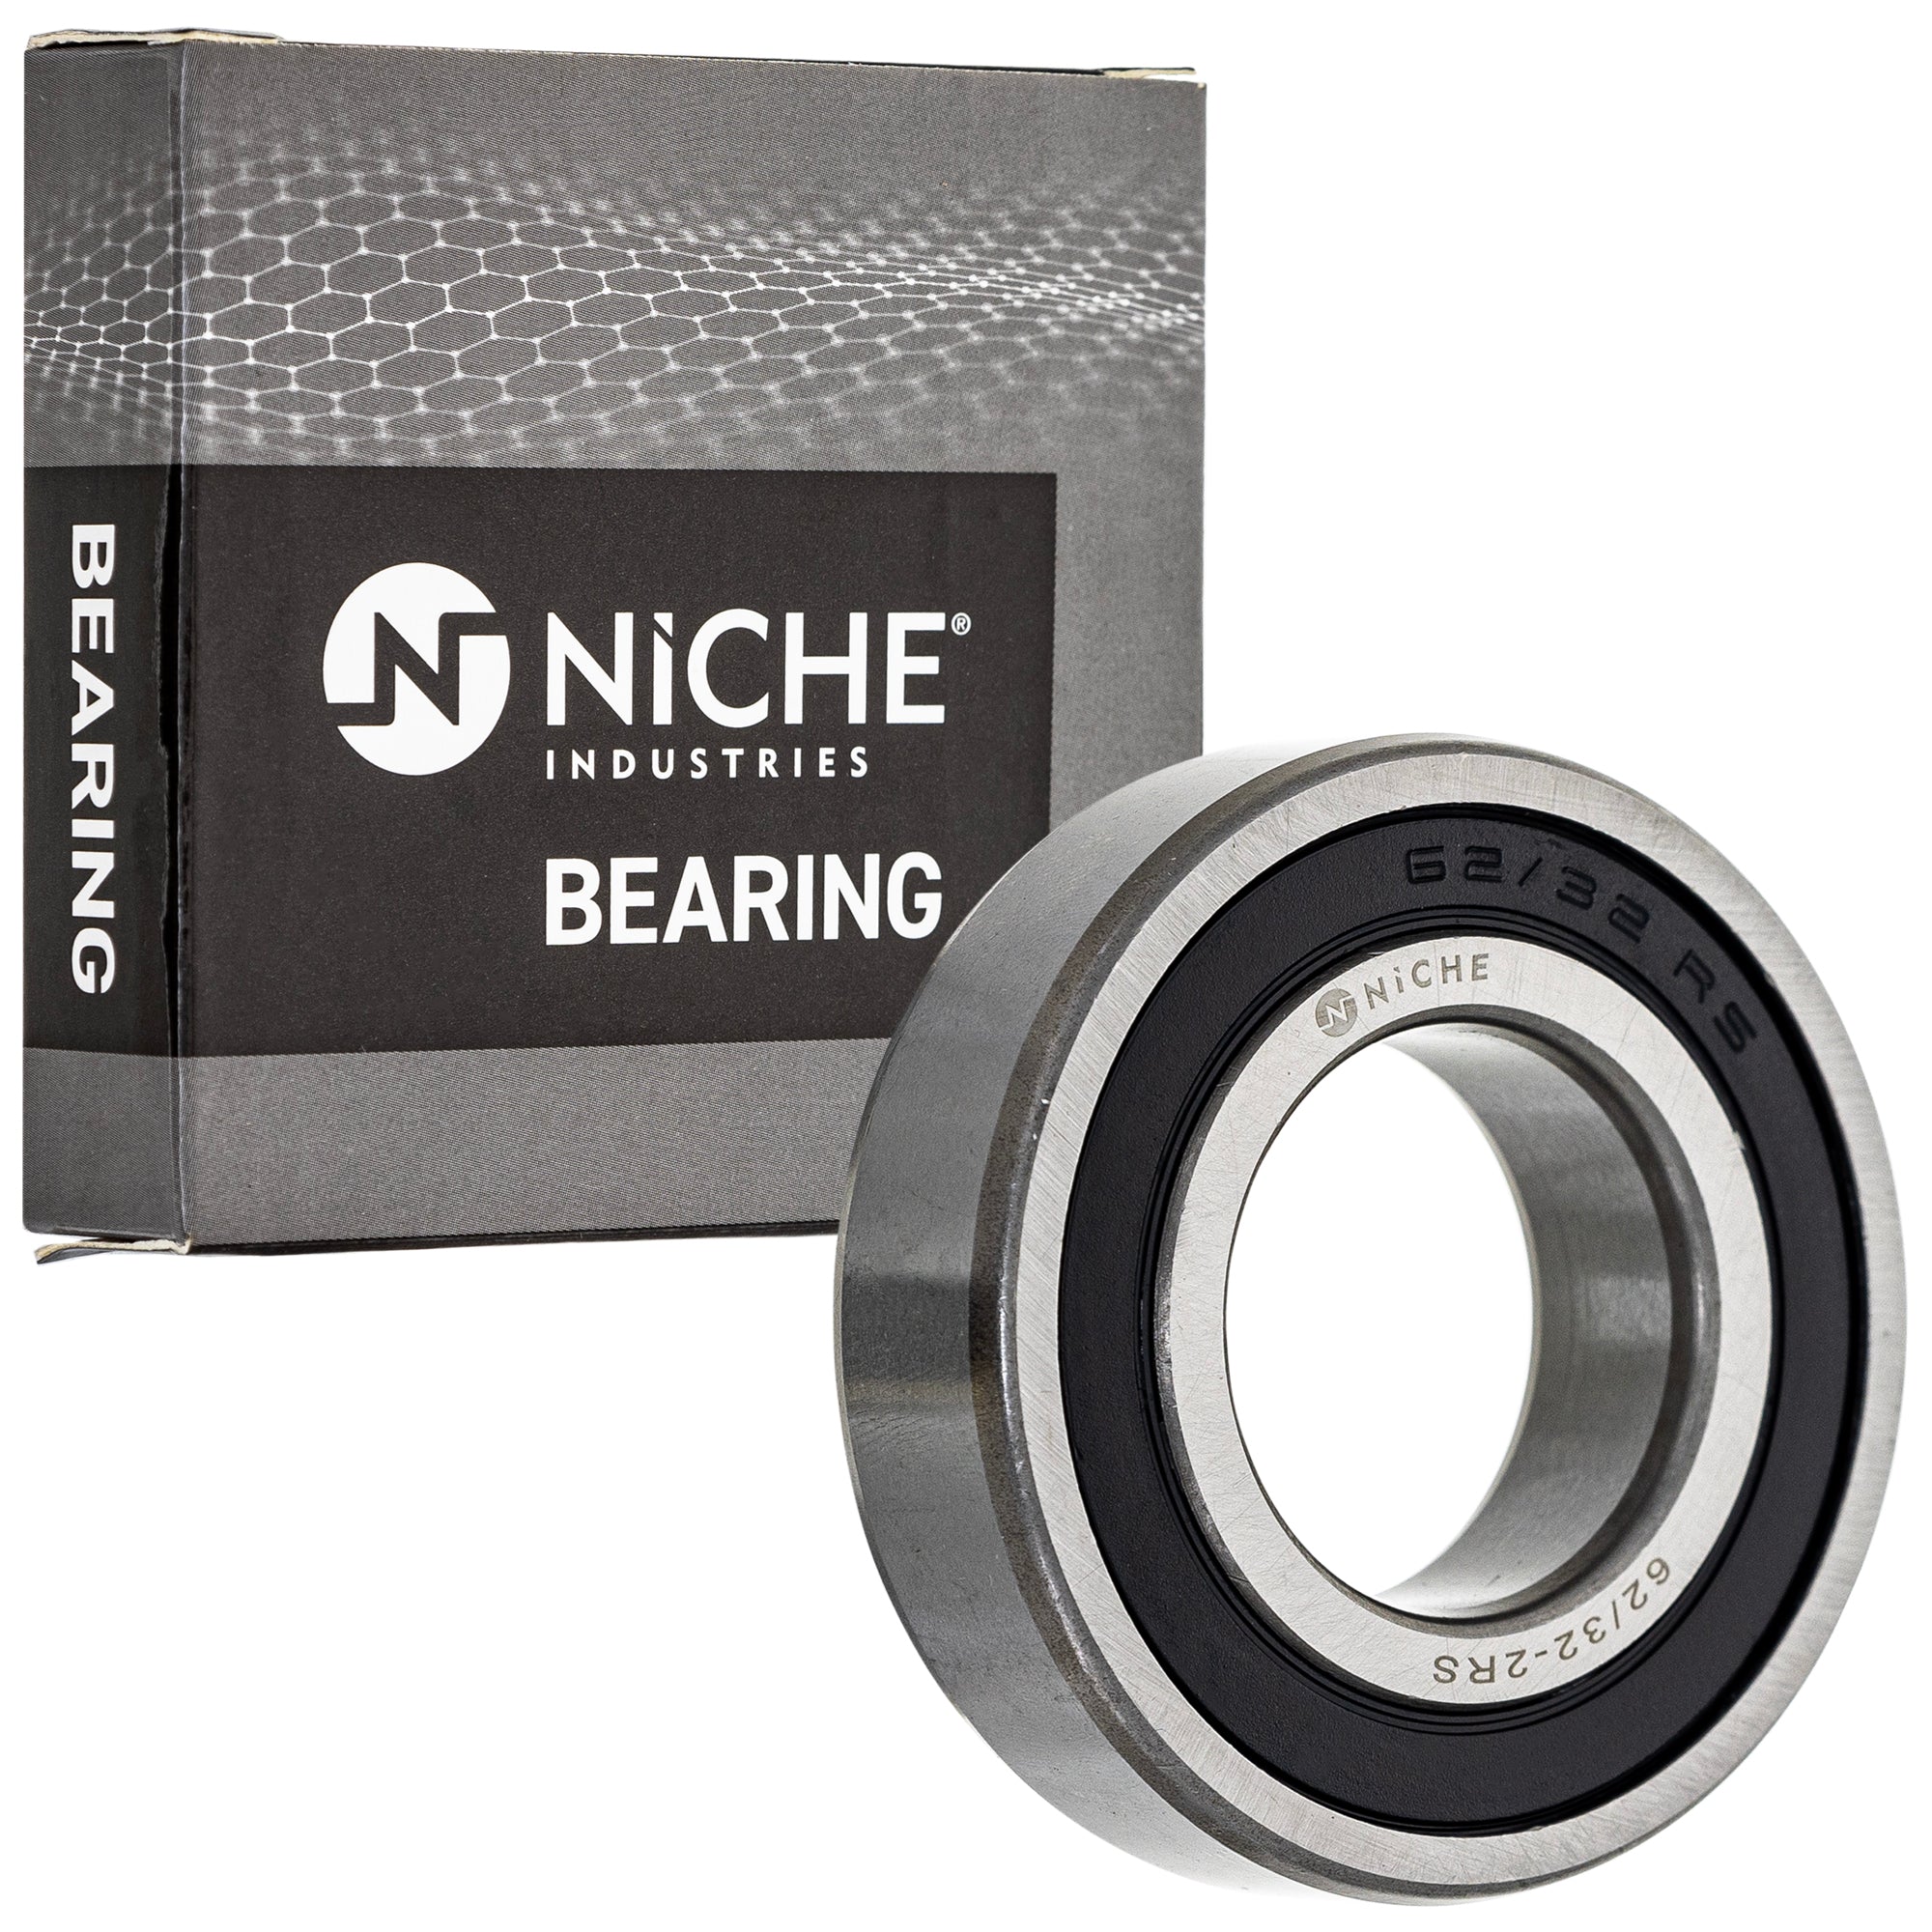 NICHE 519-CBB2282R Bearing 2-Pack for zOTHER KFX80